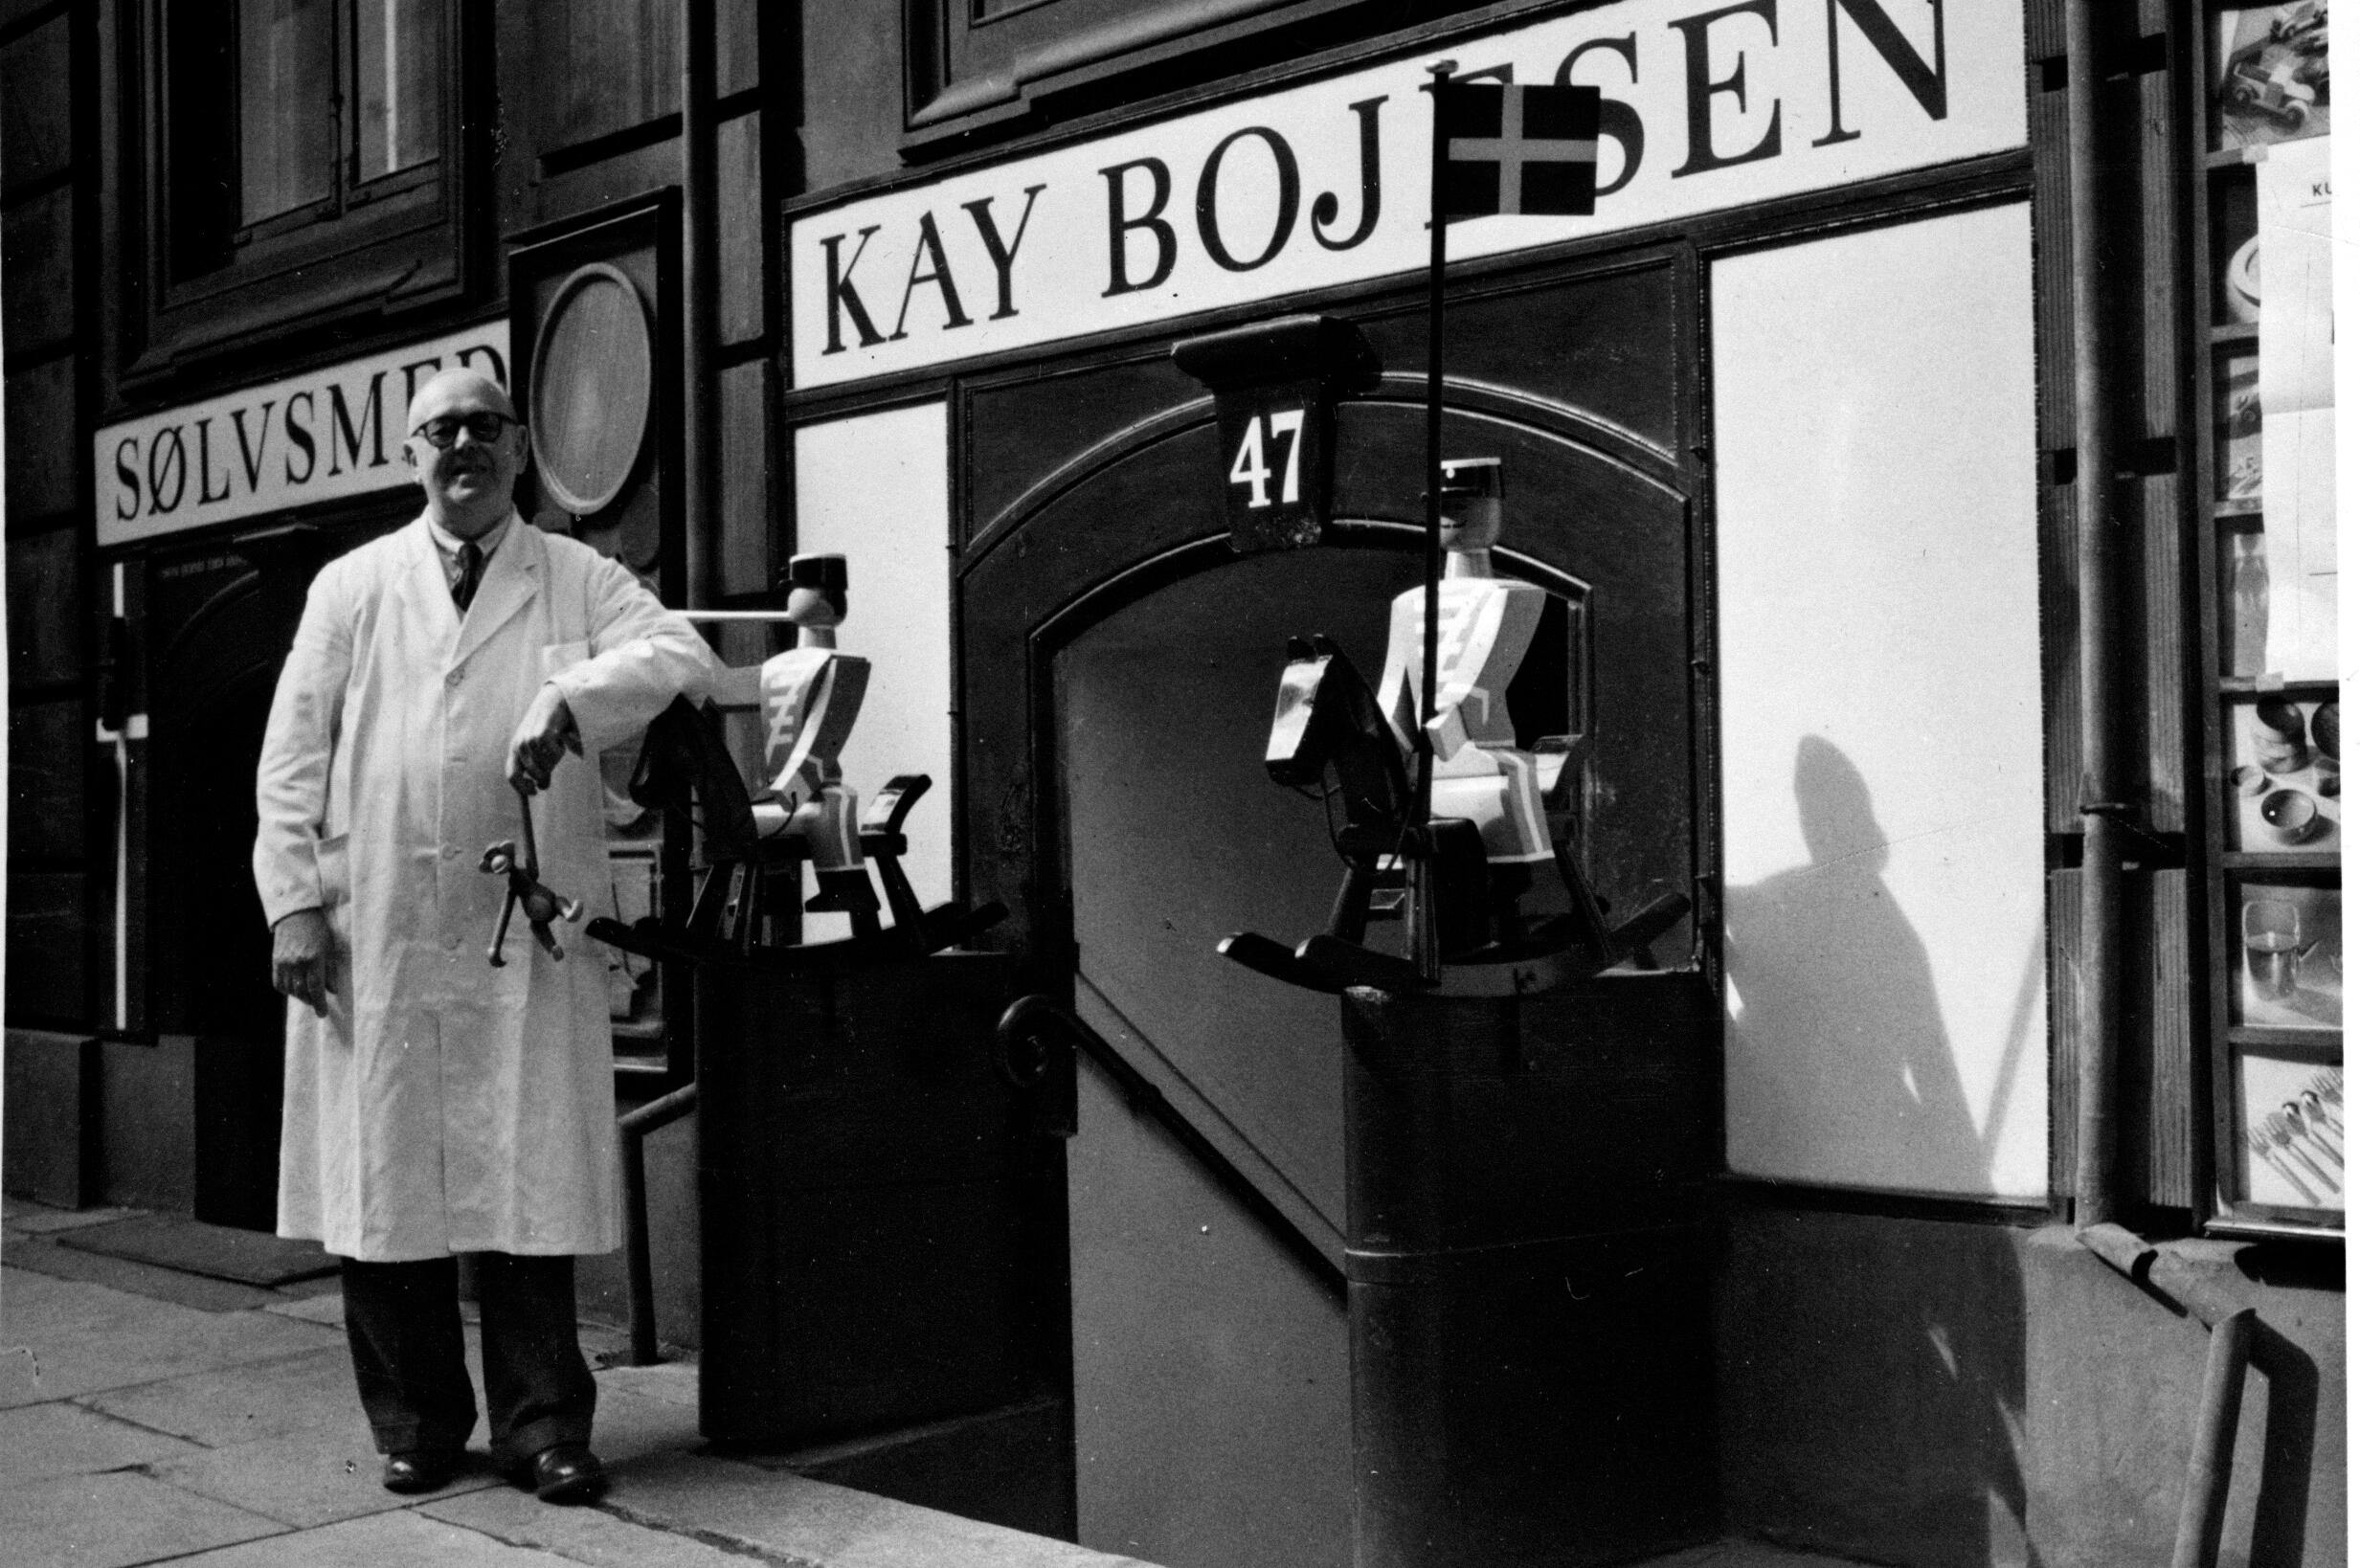 Kay Bojesen out in front of his shop